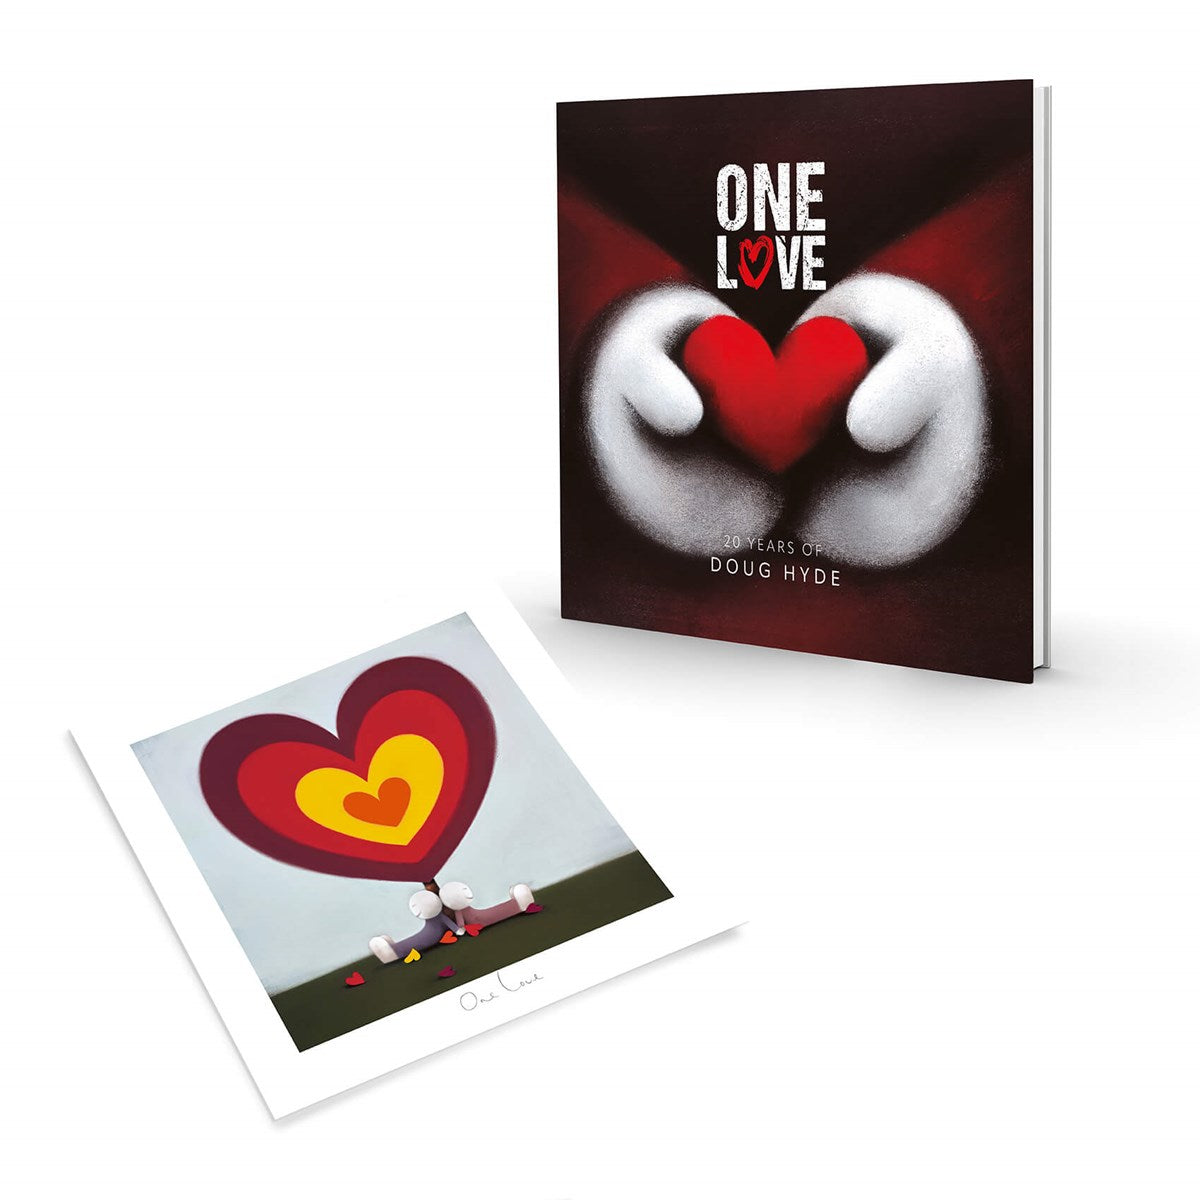 One Love (Book) Limited Edition